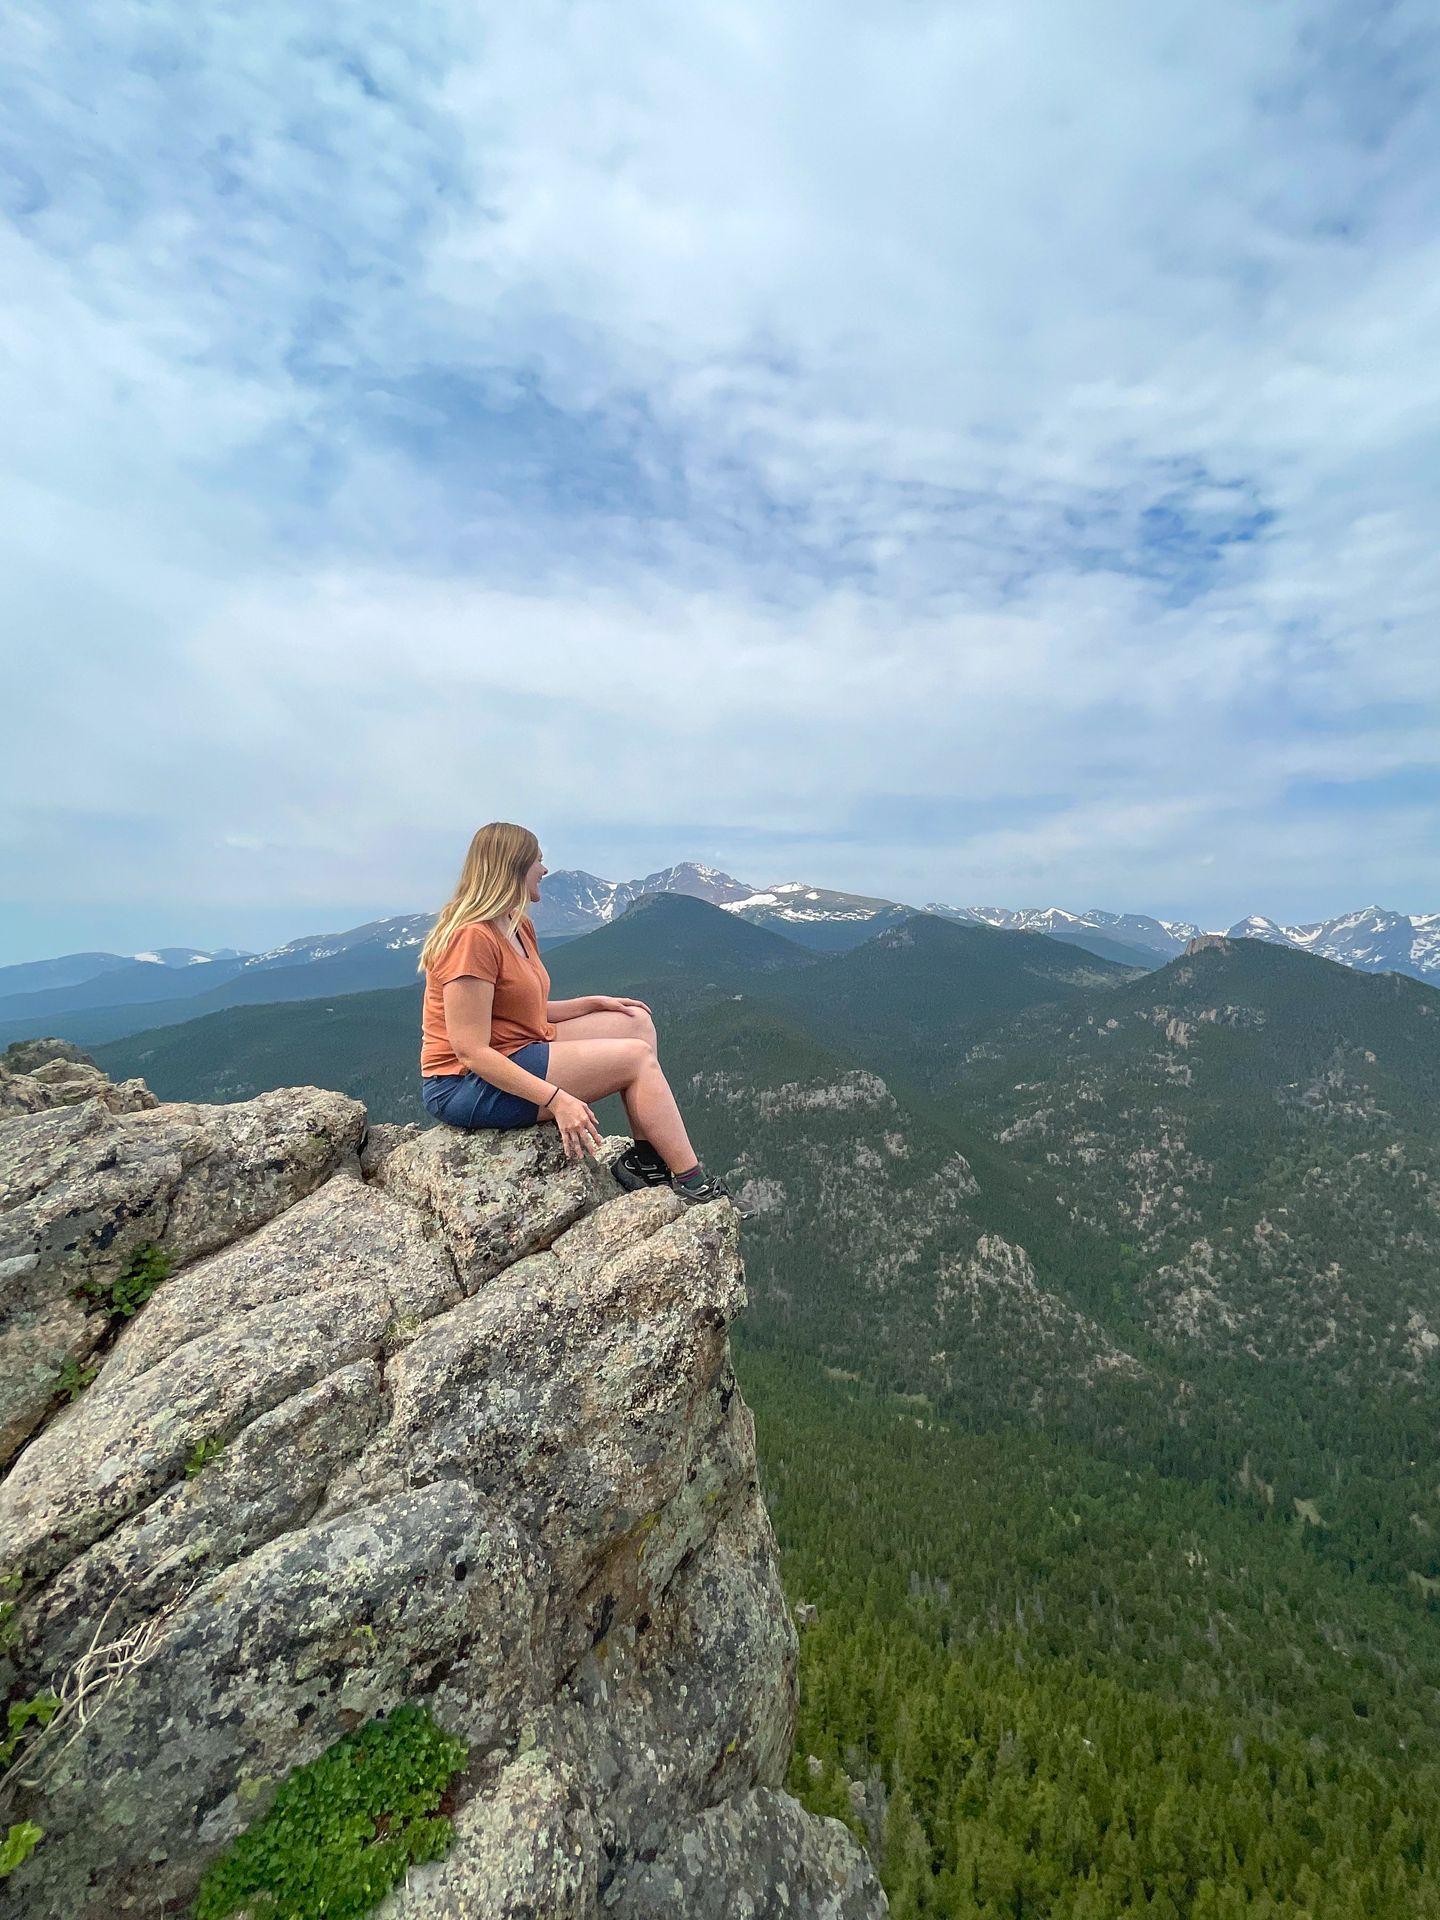 Lydia sitting on the edge of a rock and looking out at the Rocky Mountains